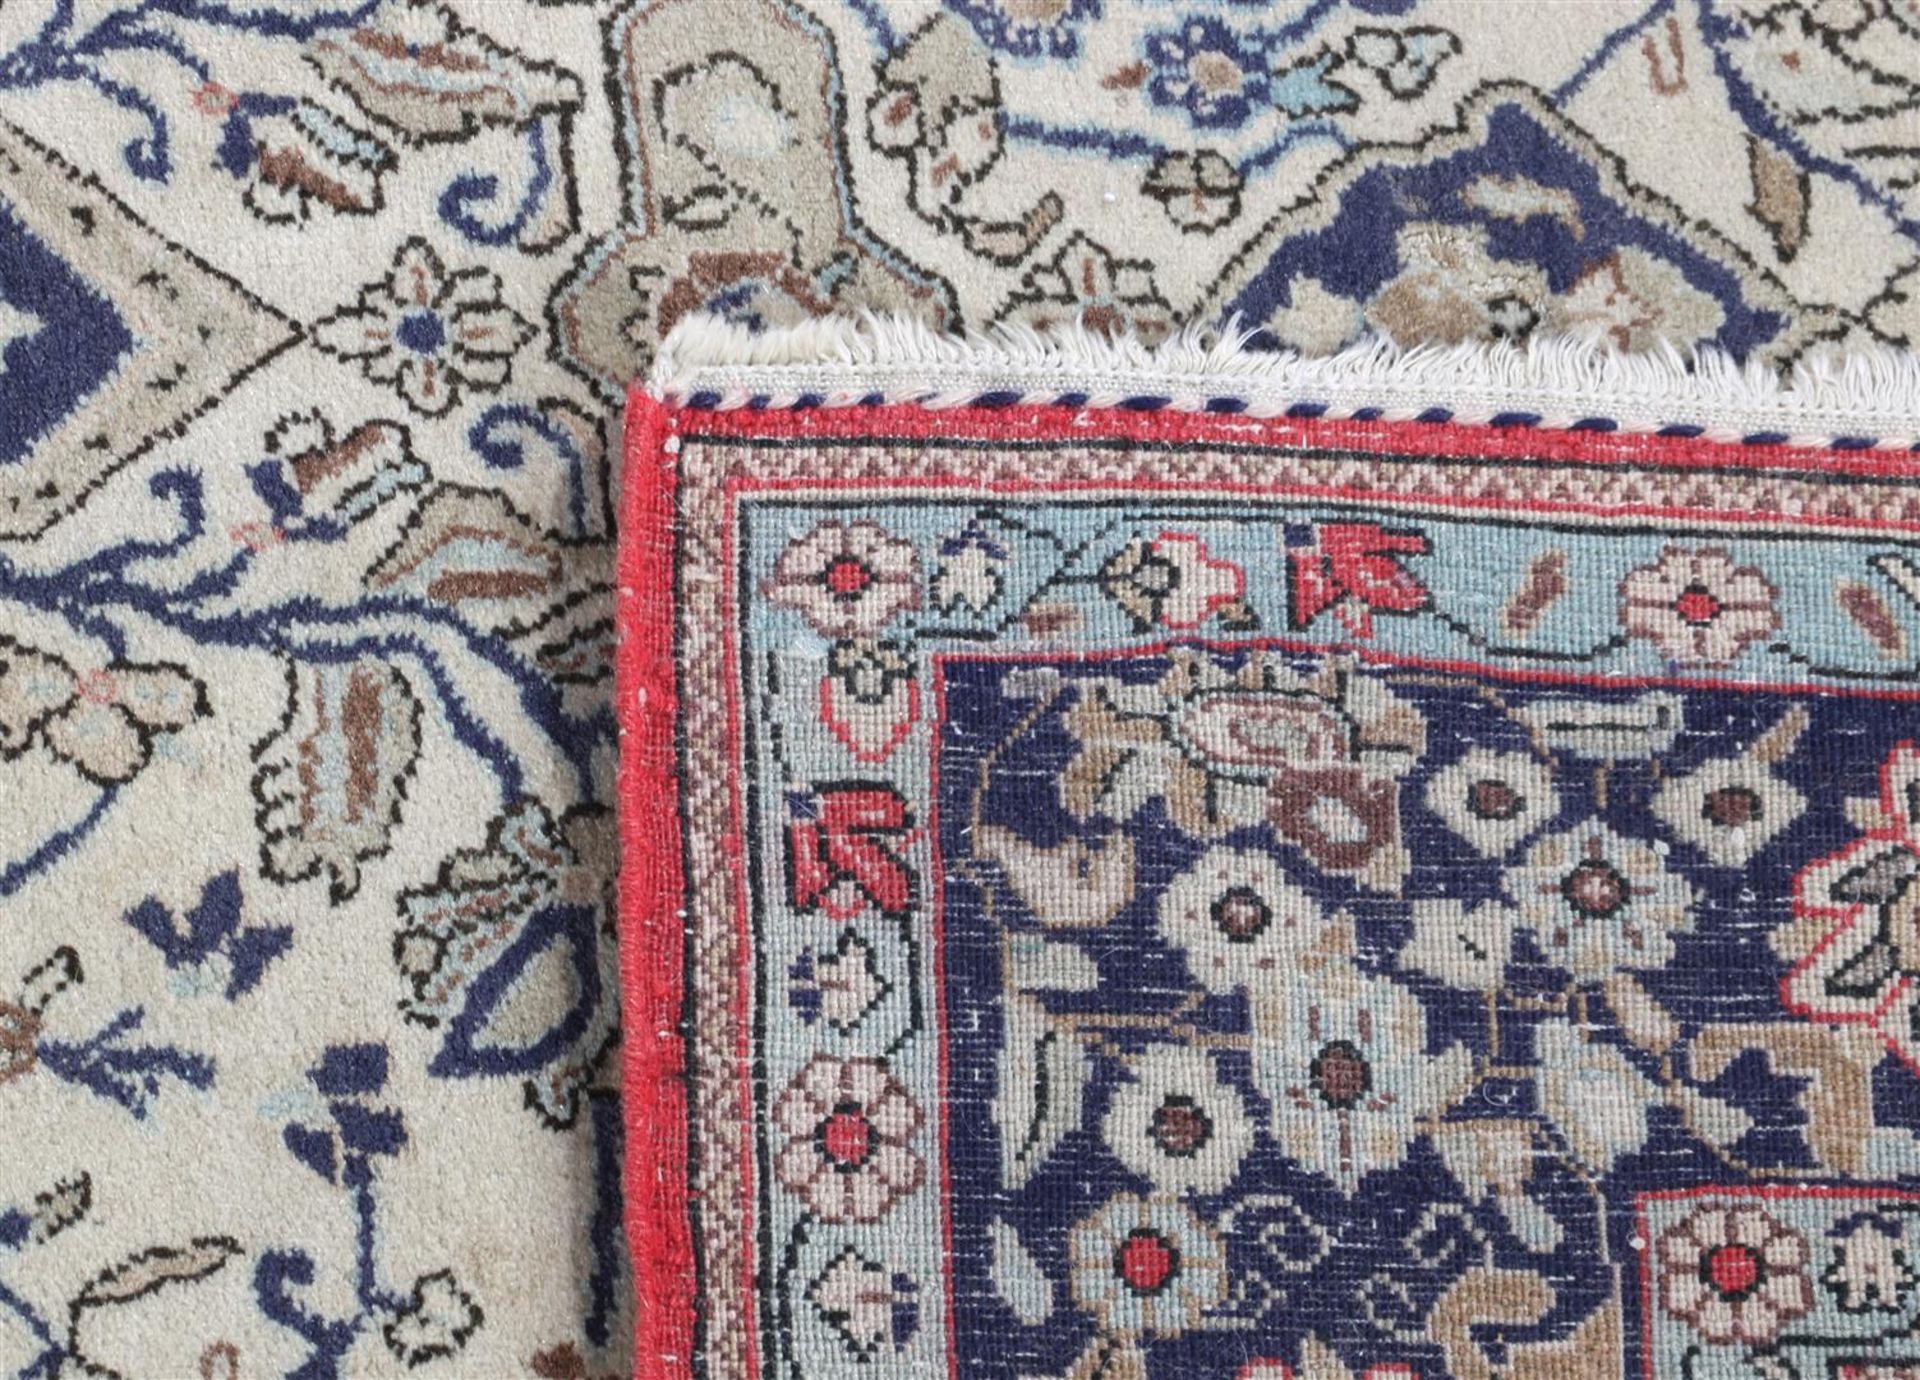 Oriental hand-knotted carpet - Image 3 of 5